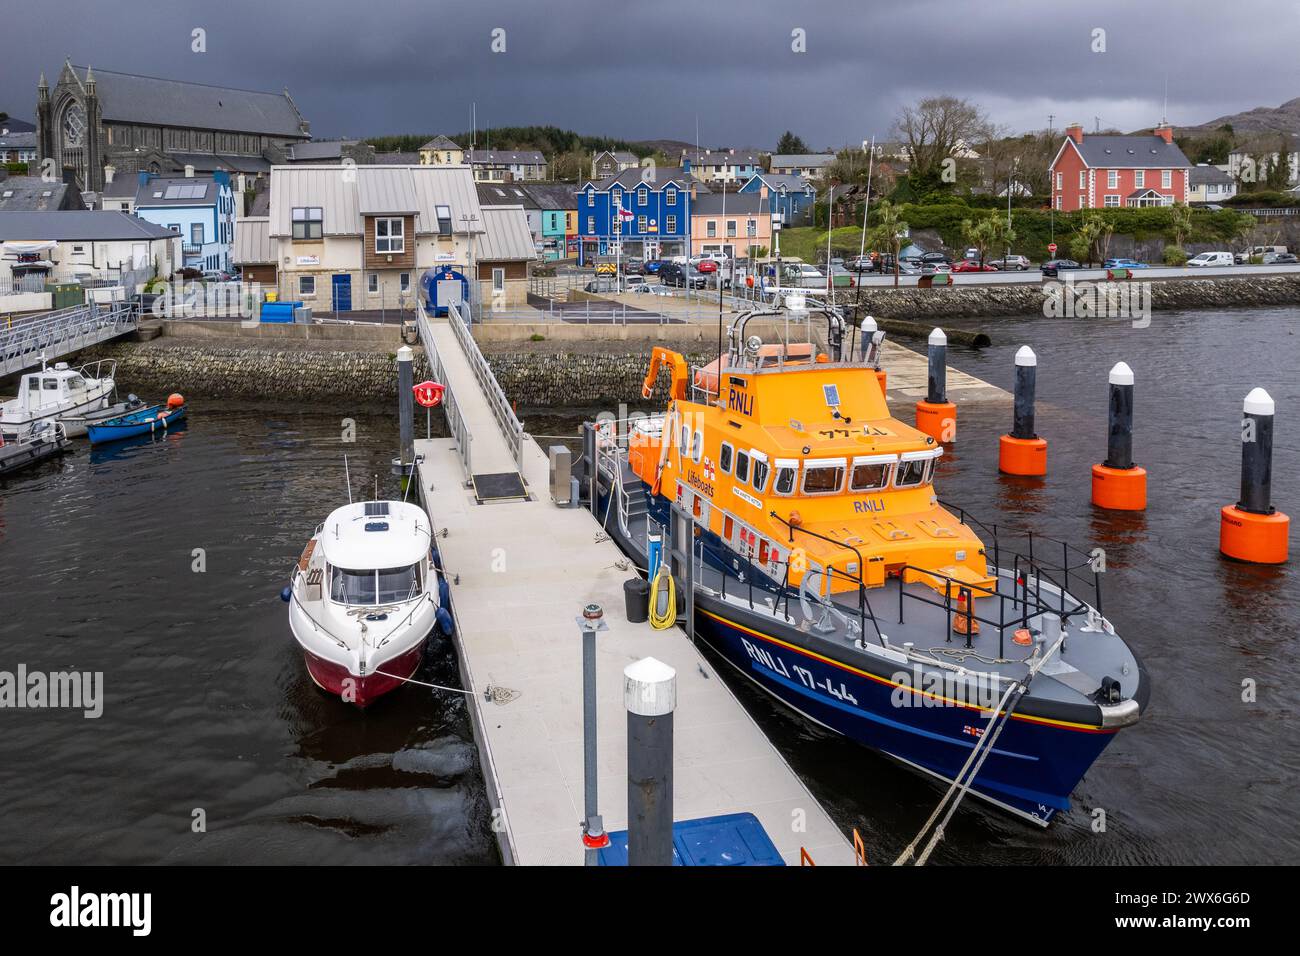 RNLI Lifeboat 'Annette Hutton' and lifeboat station in Castletownbere, West Cork, Ireland. Stock Photo